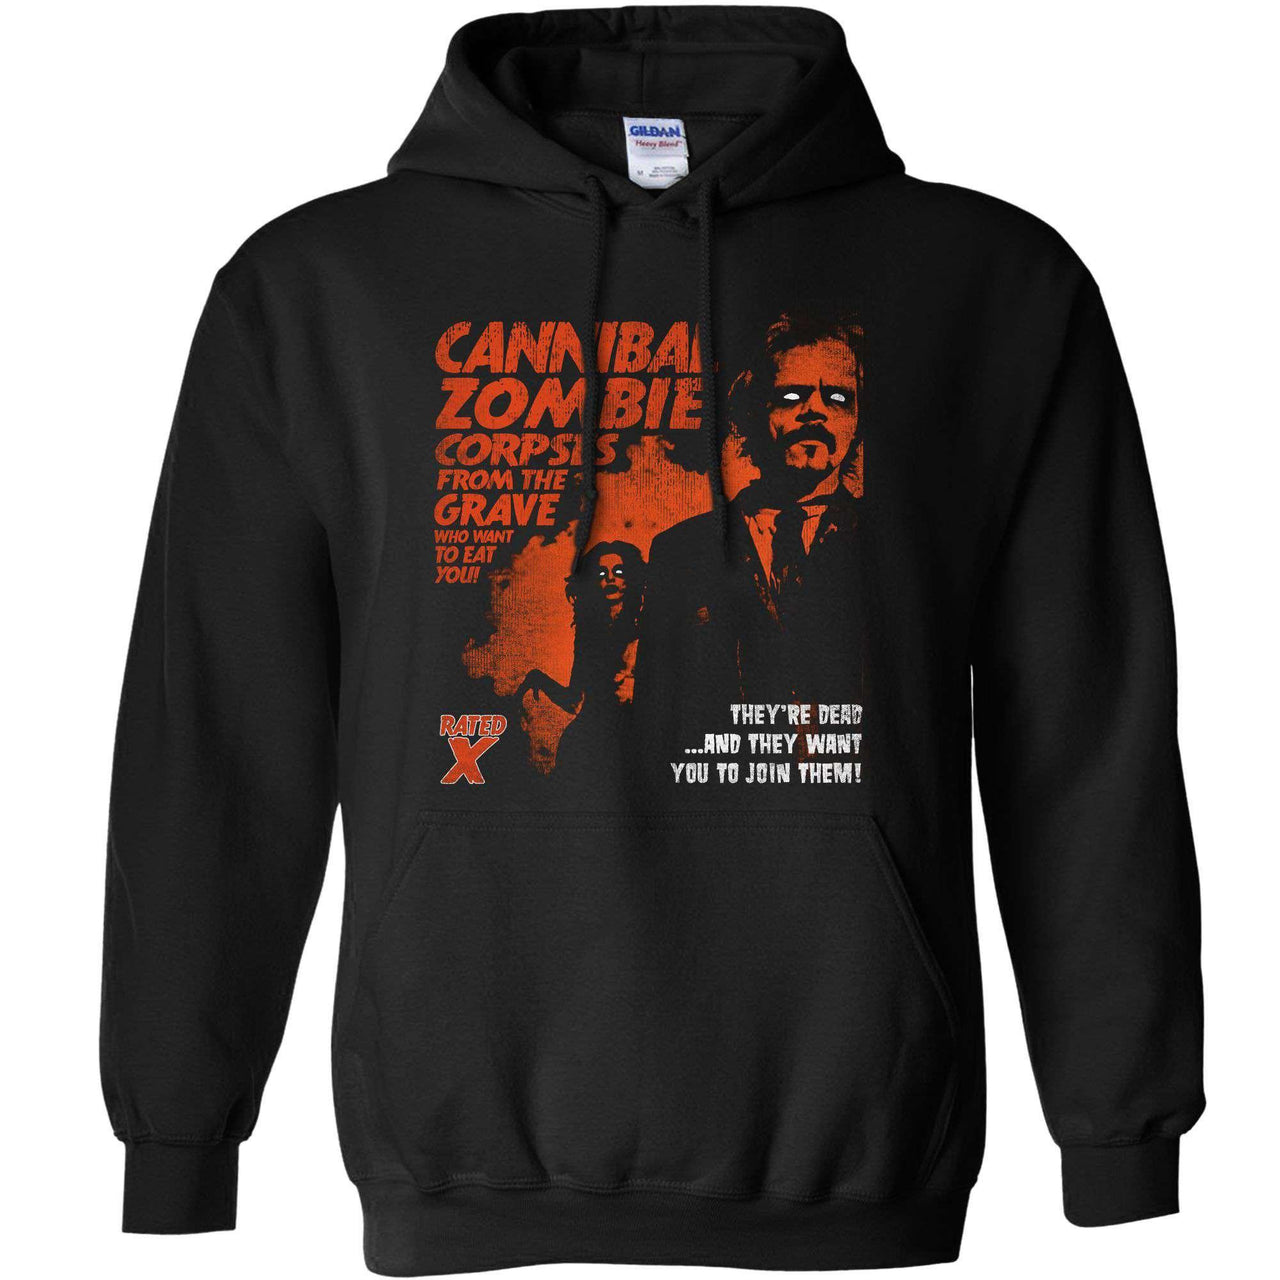 Deathray B Movie Cannibal Zombies Unisex Hoodie 8Ball